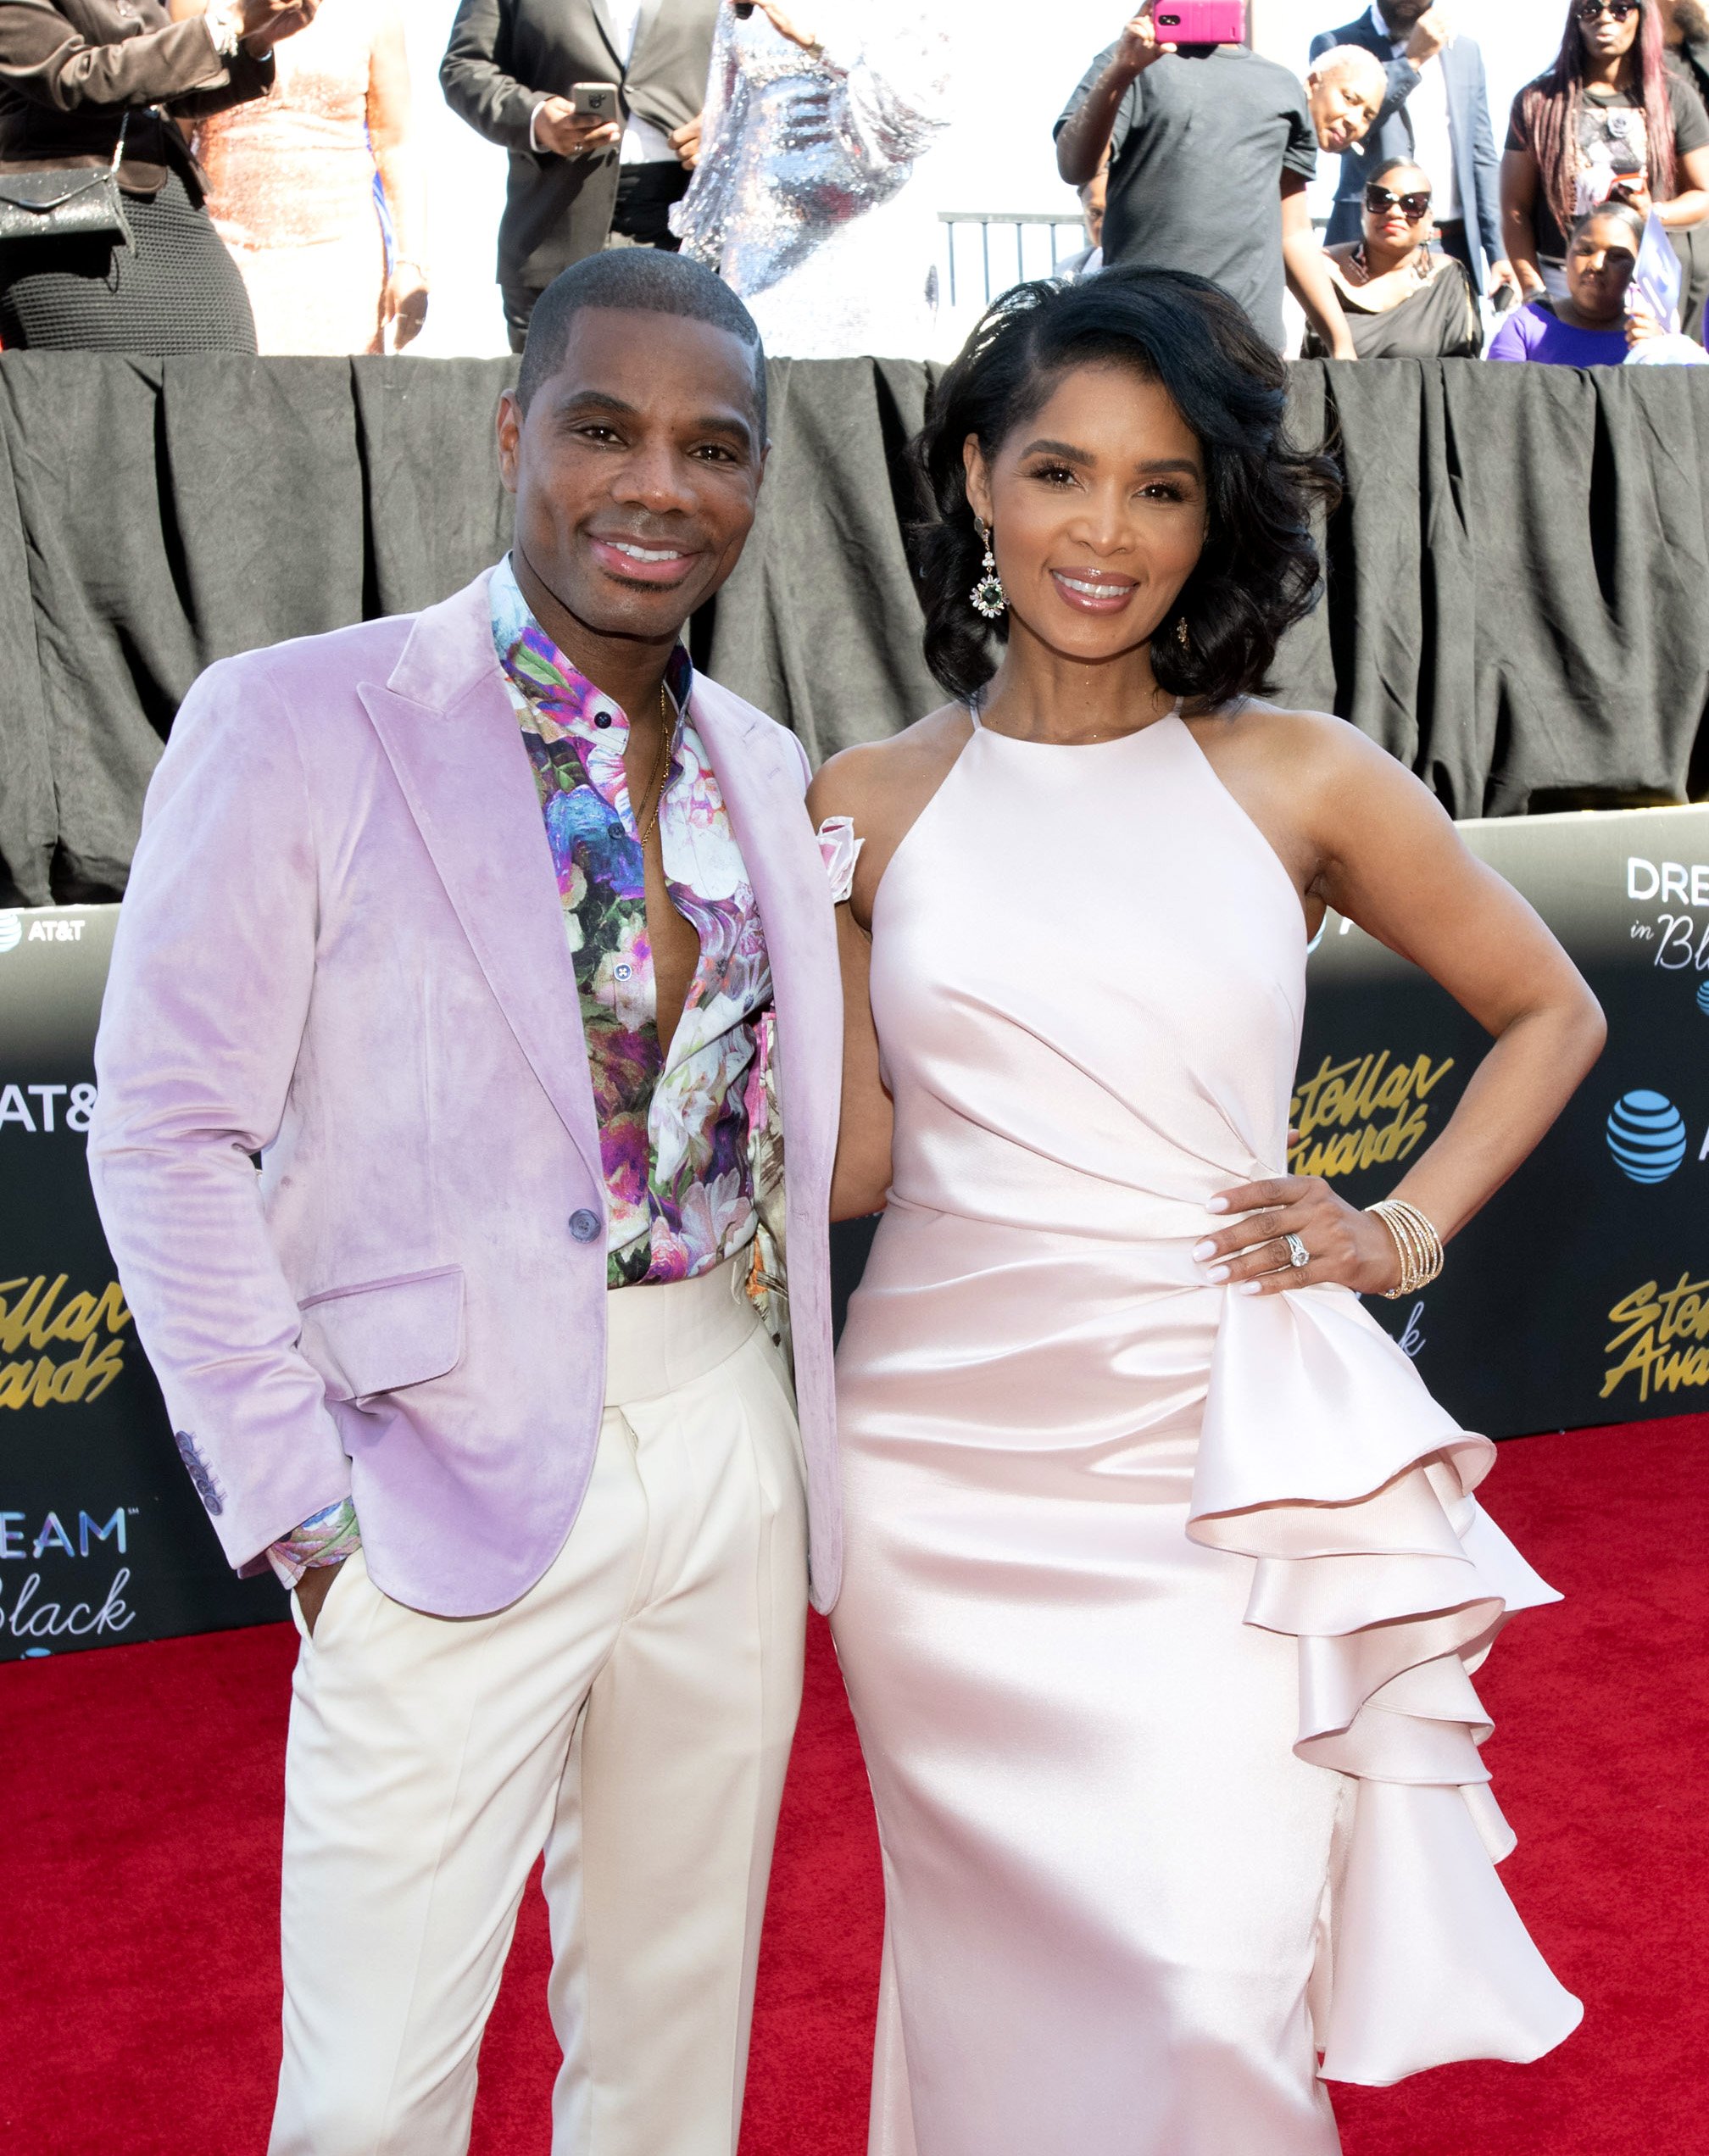 Kirk Franklin and Tammy Collins attend the 34th annual Stellar Gospel Music Awards on March 29, 2019. | Source: Getty Images